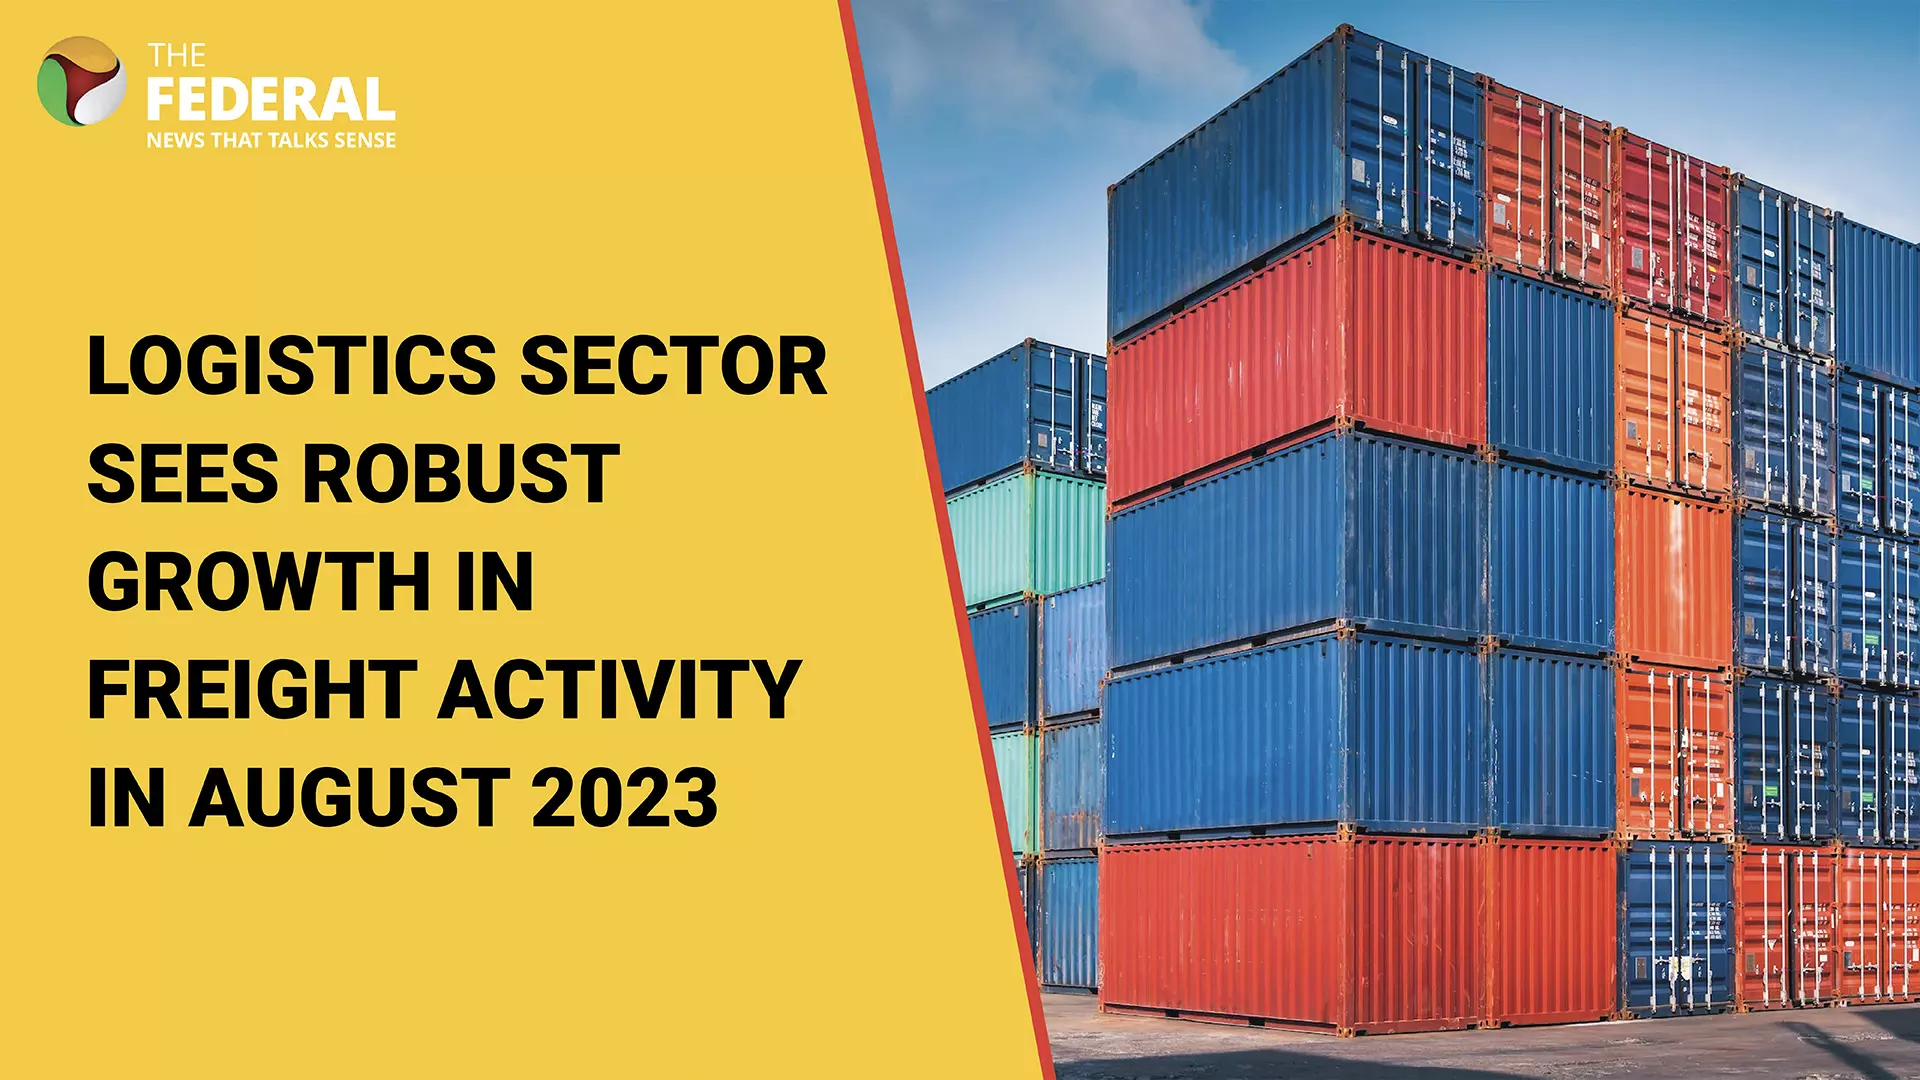 Logistics sector sees robust growth in freight activity in August 2023